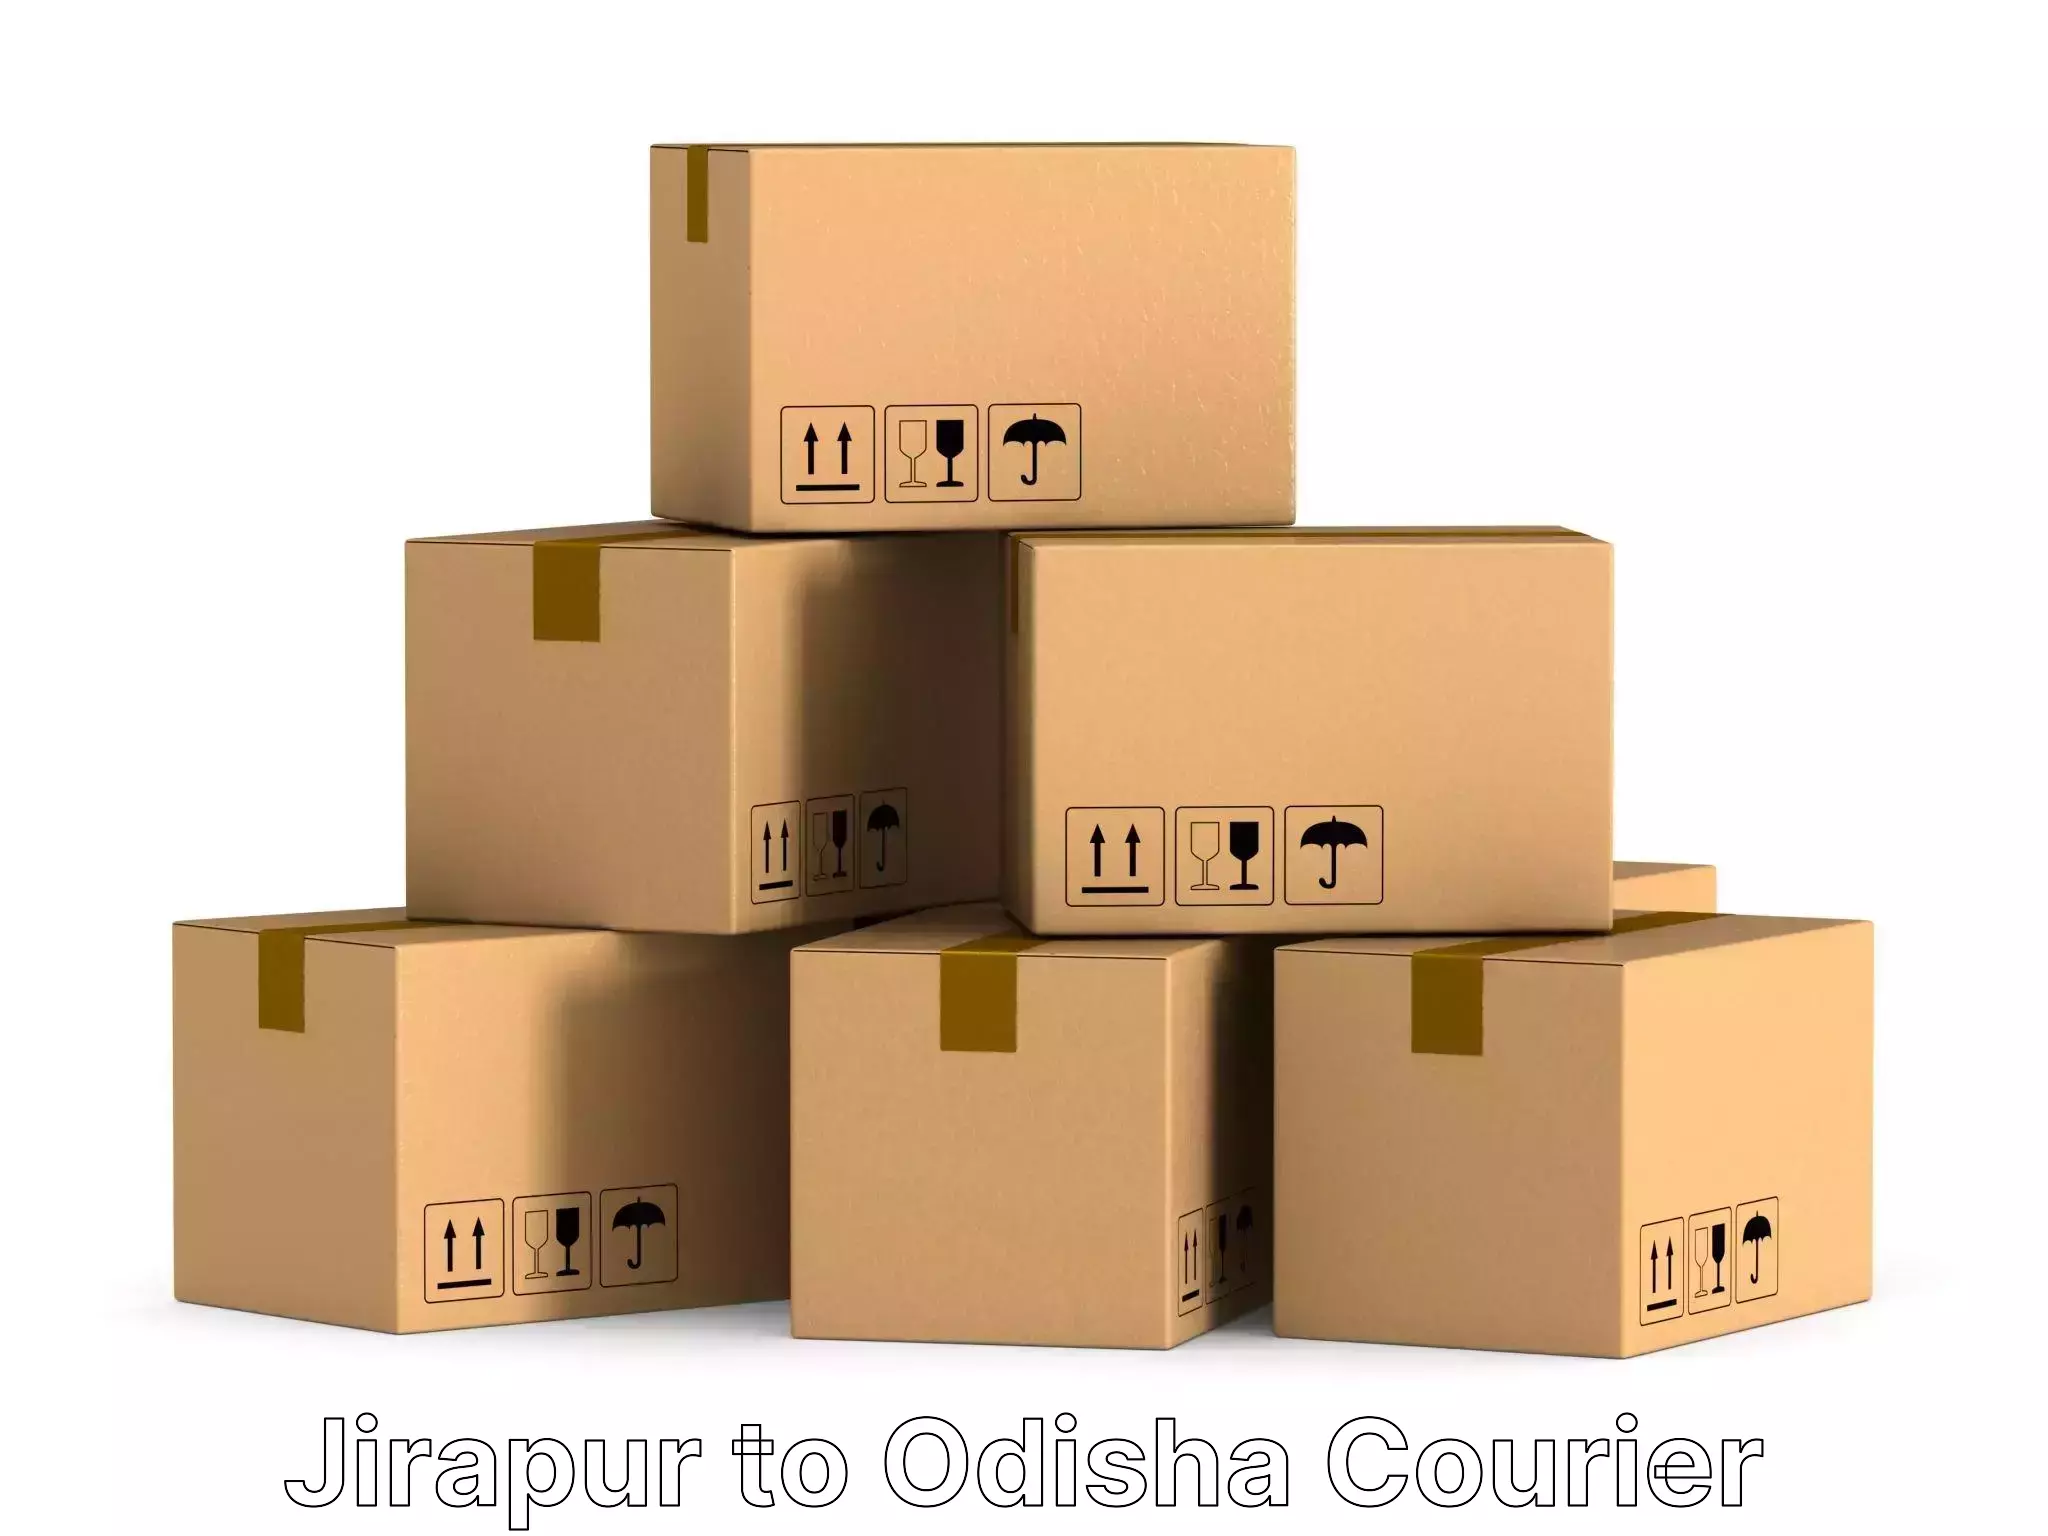 Expert furniture transport in Jirapur to Anandapur